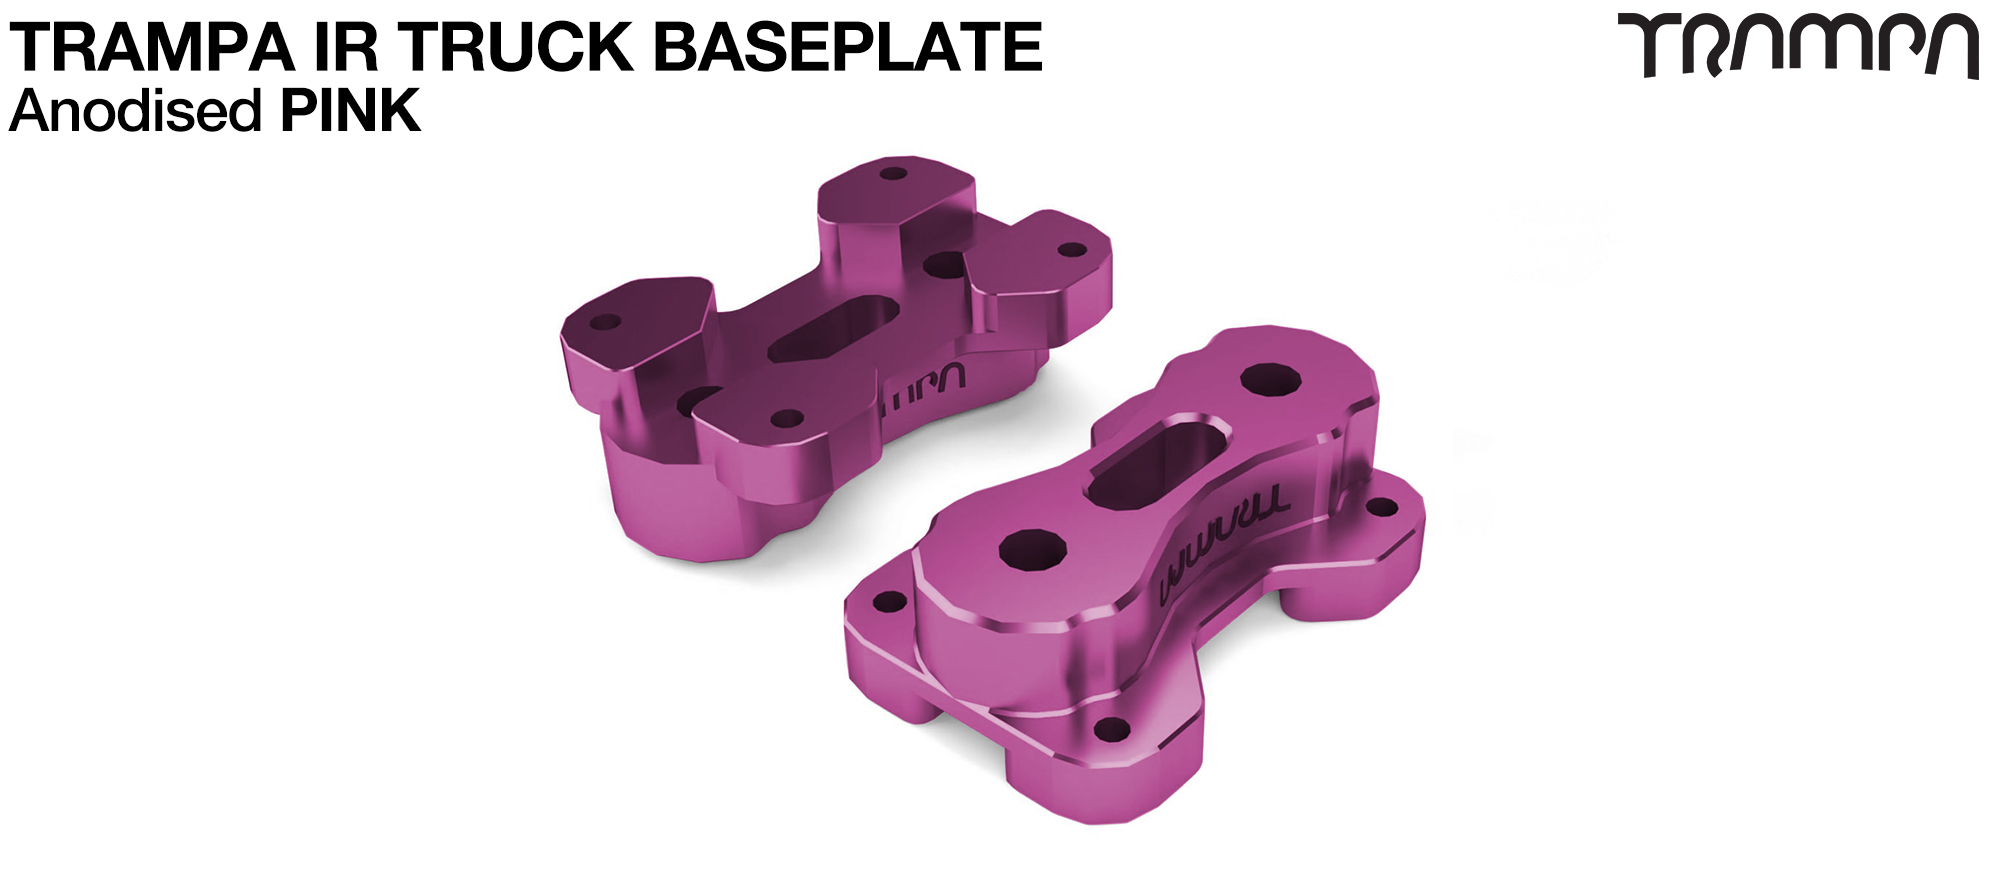 TRAMPA IR BASEPLATE - CNC Precision made TRAMPA IR Trucks are super light & Packed with performance - PINK